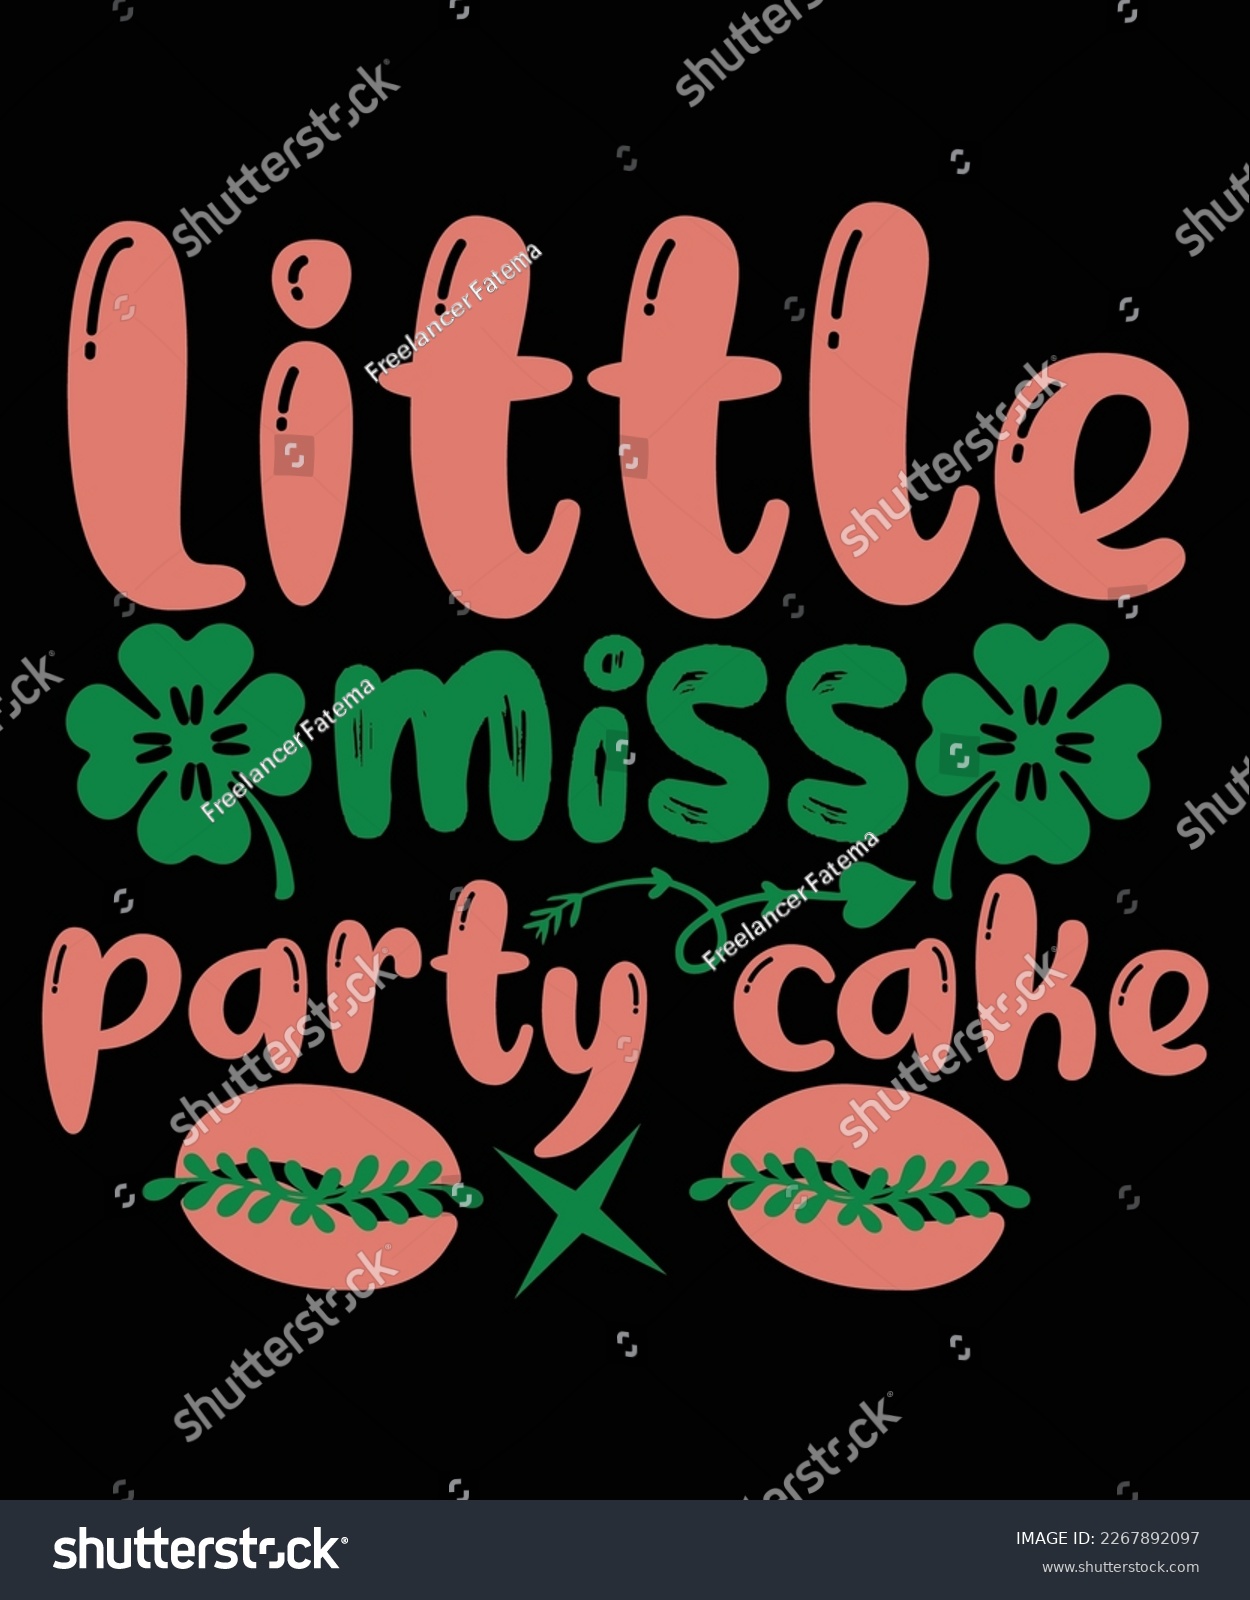 SVG of Little miss party cake Mardi Gras SVG Design, SVG bundle, Mardi Gras new, free pic, Mardi Gras t-shirt, ready to print, cut file,  T-shirt design bundle, new SVG design svg